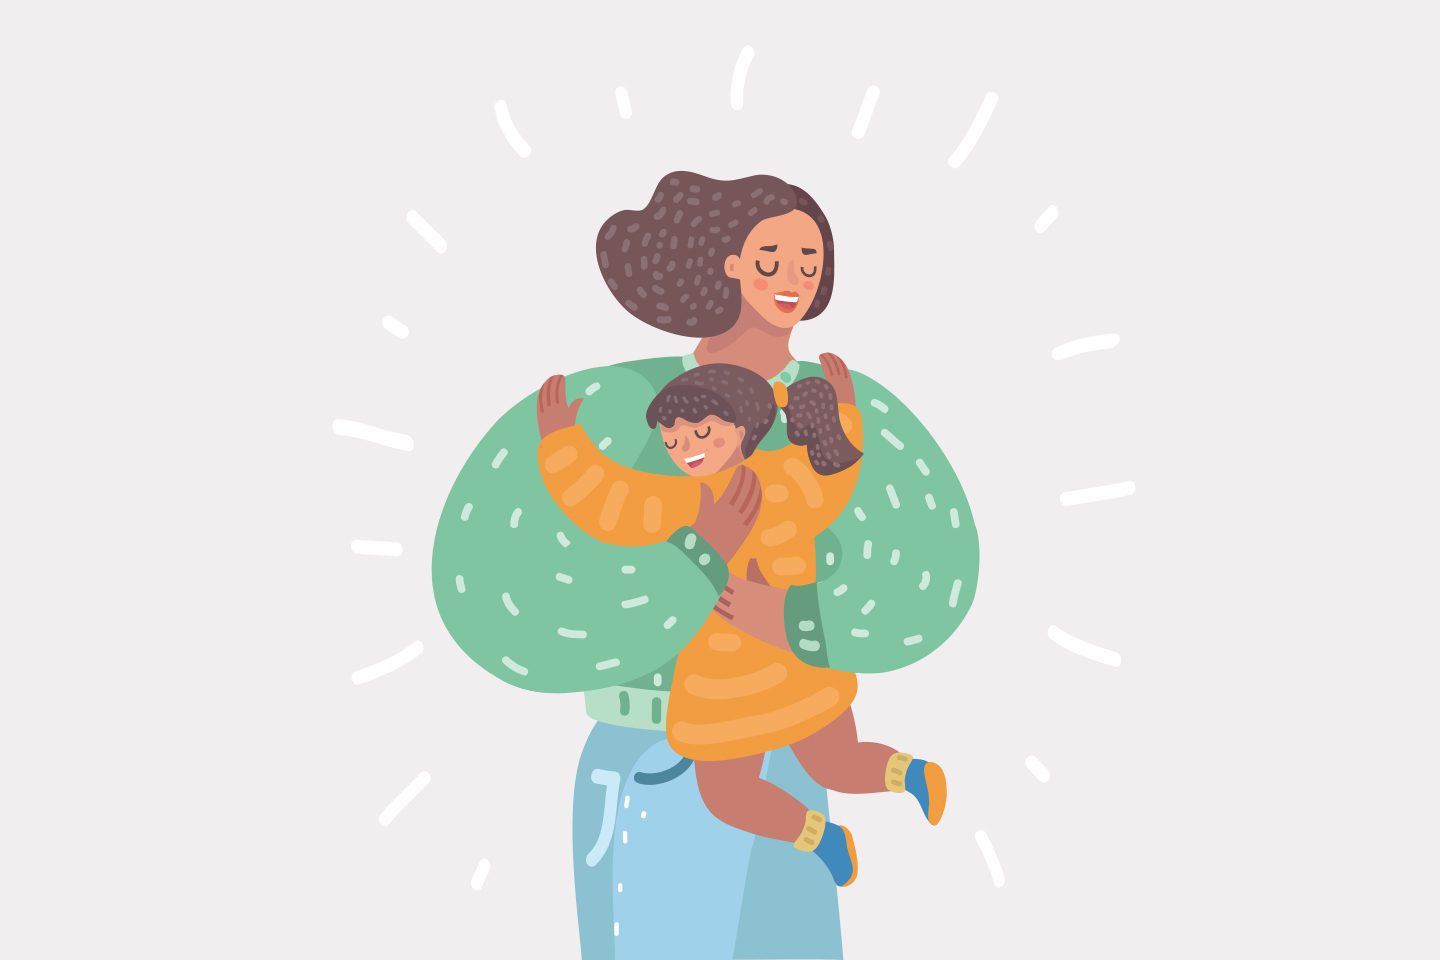 illustration of baby sitter hugging a small child